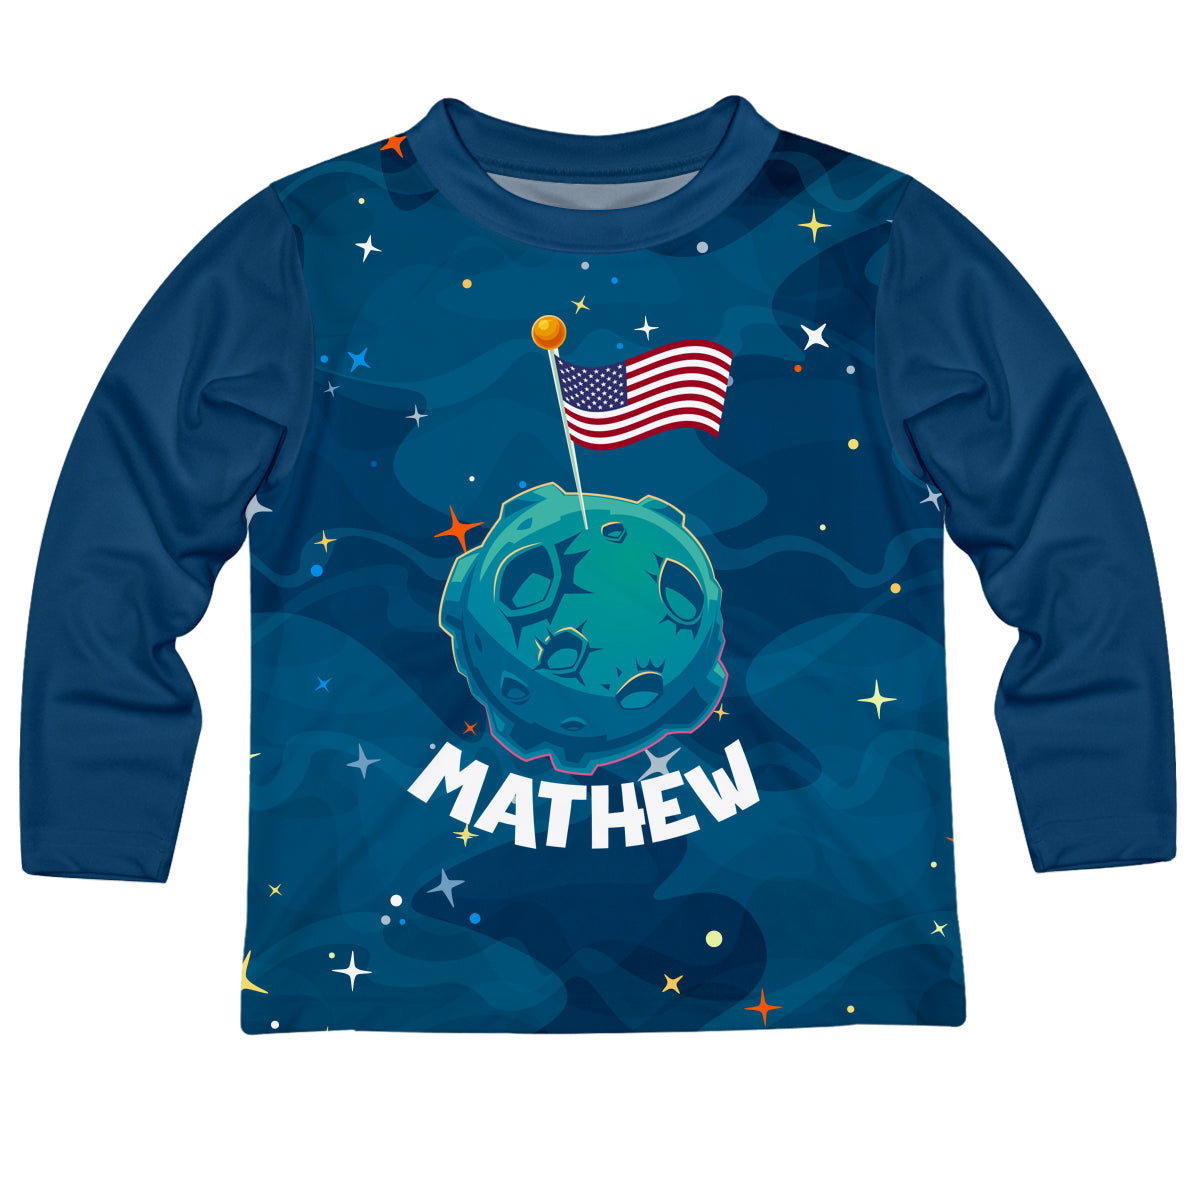 Conquering The Moon Name Navy Long Sleeve Tee Shirt - Wimziy&Co.